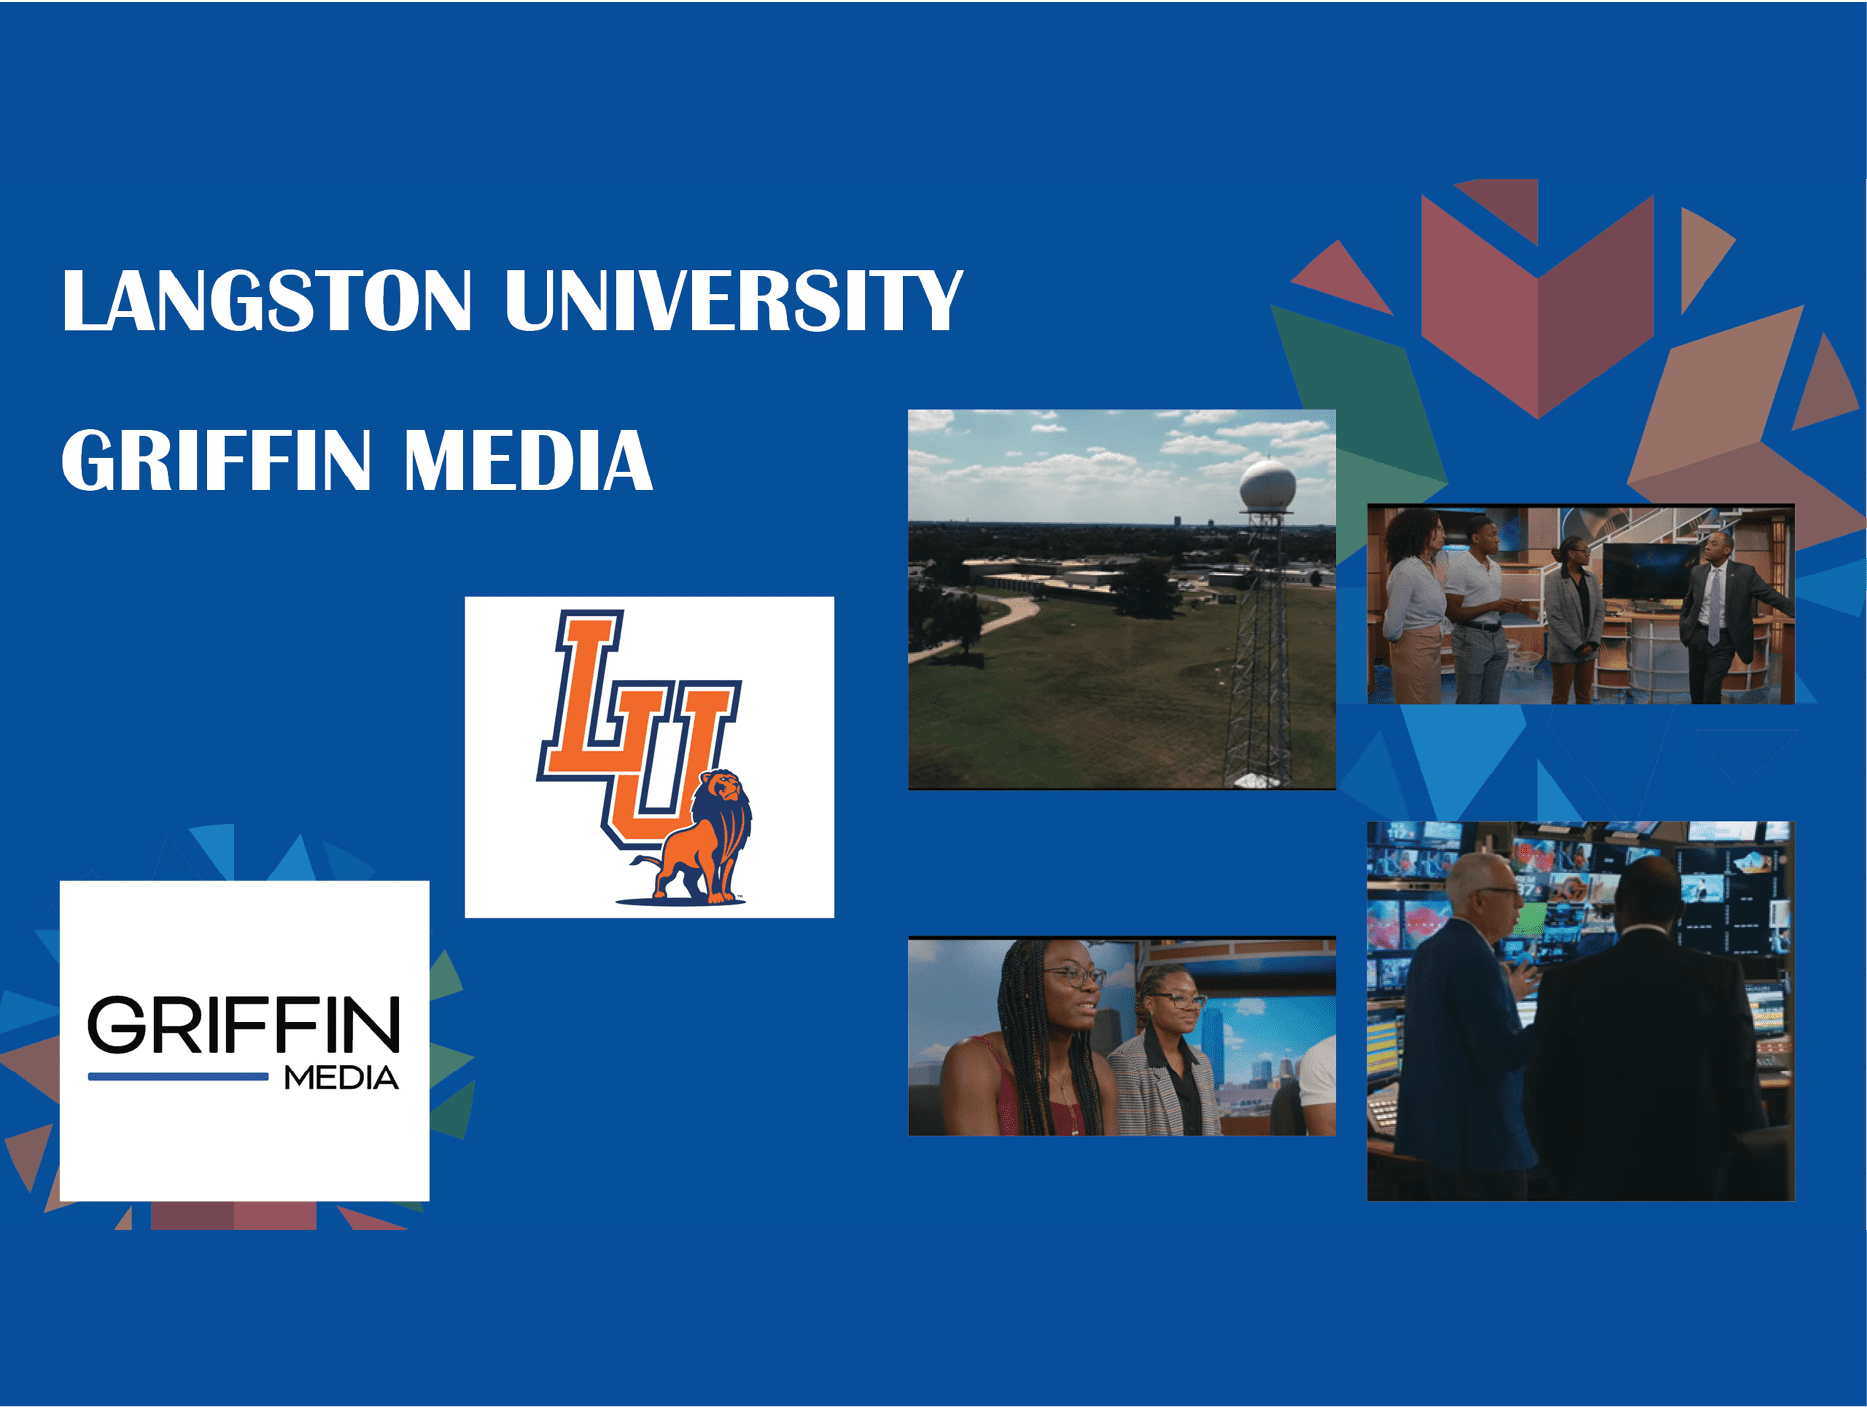 Langston University and Griffin Media